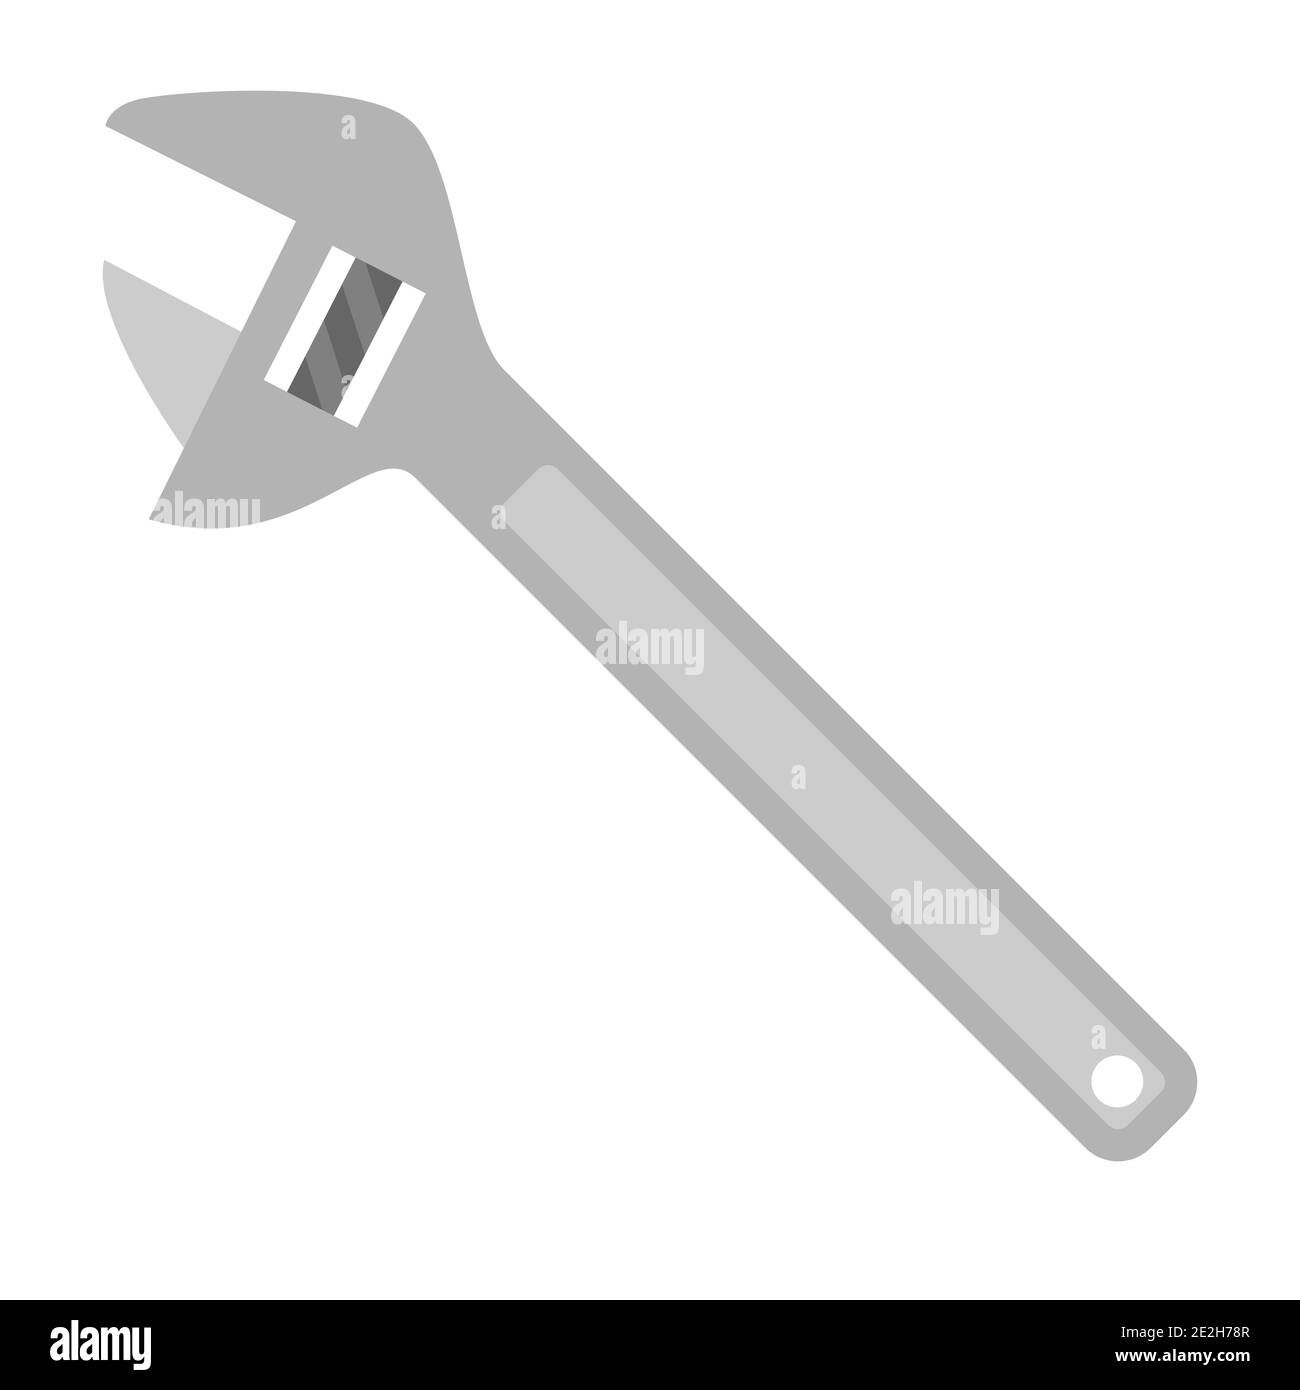 Illustration of wrench. Stock Vector